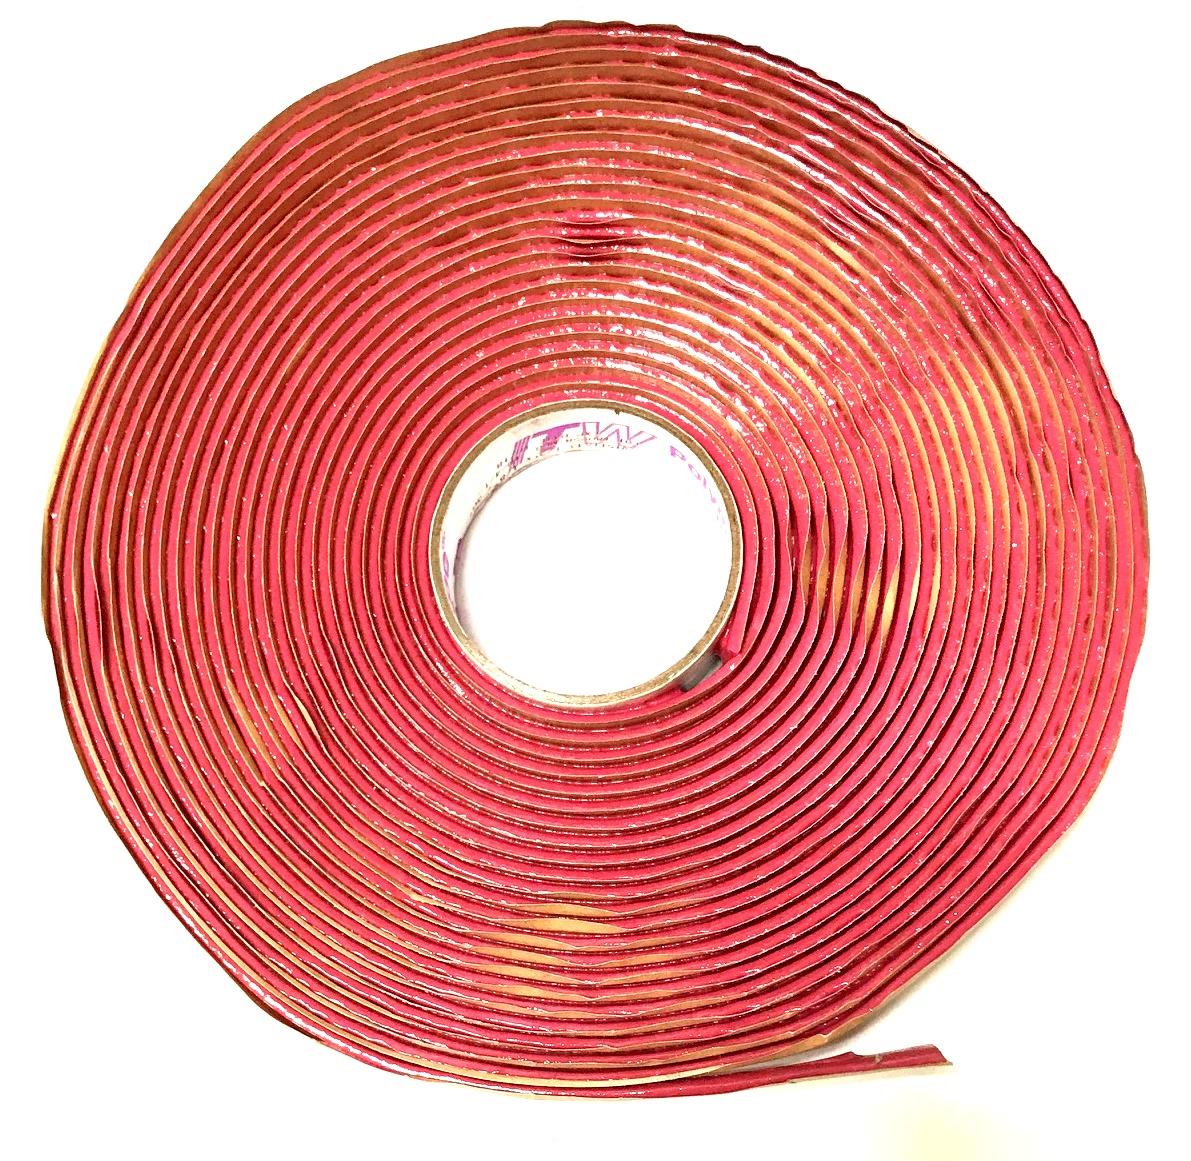 SP-2255 | SP-2255  Pink Rubber Adhesive Tape (5).jpg